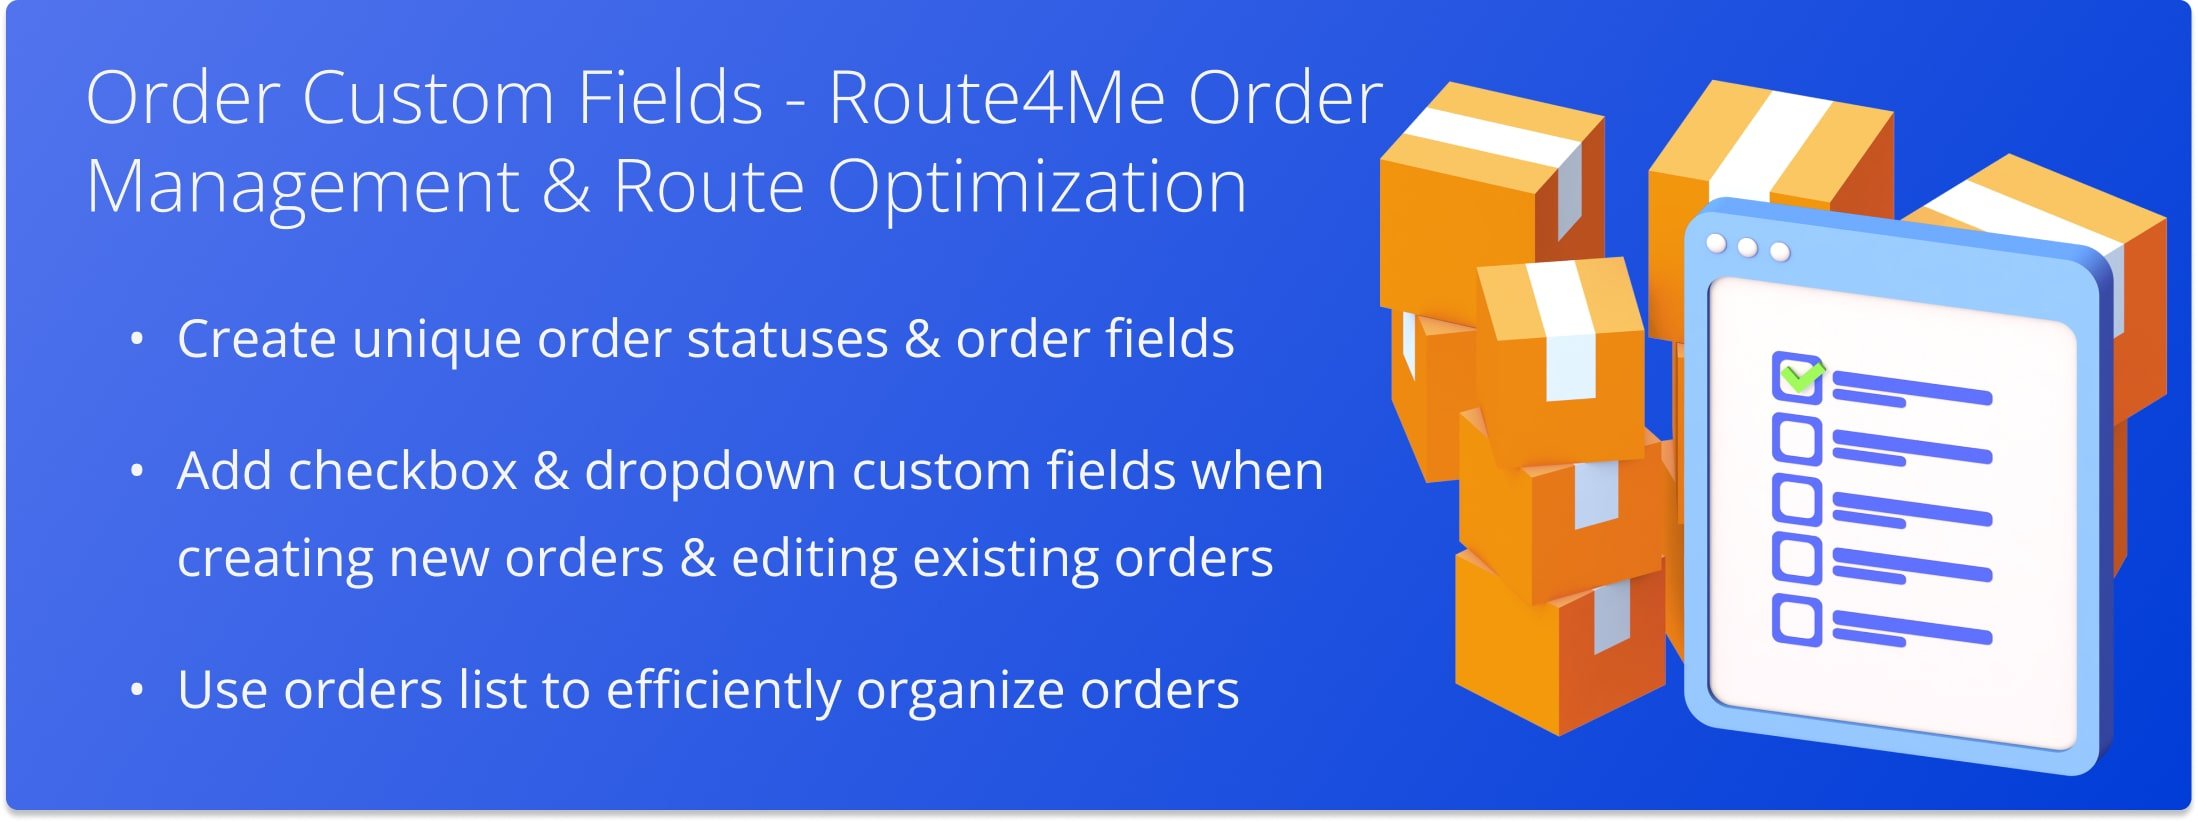 For maximum productivity and efficiency, Route4Me allows you to create Custom Order Fields that can be added to your imported or generate orders as unique internal statuses.